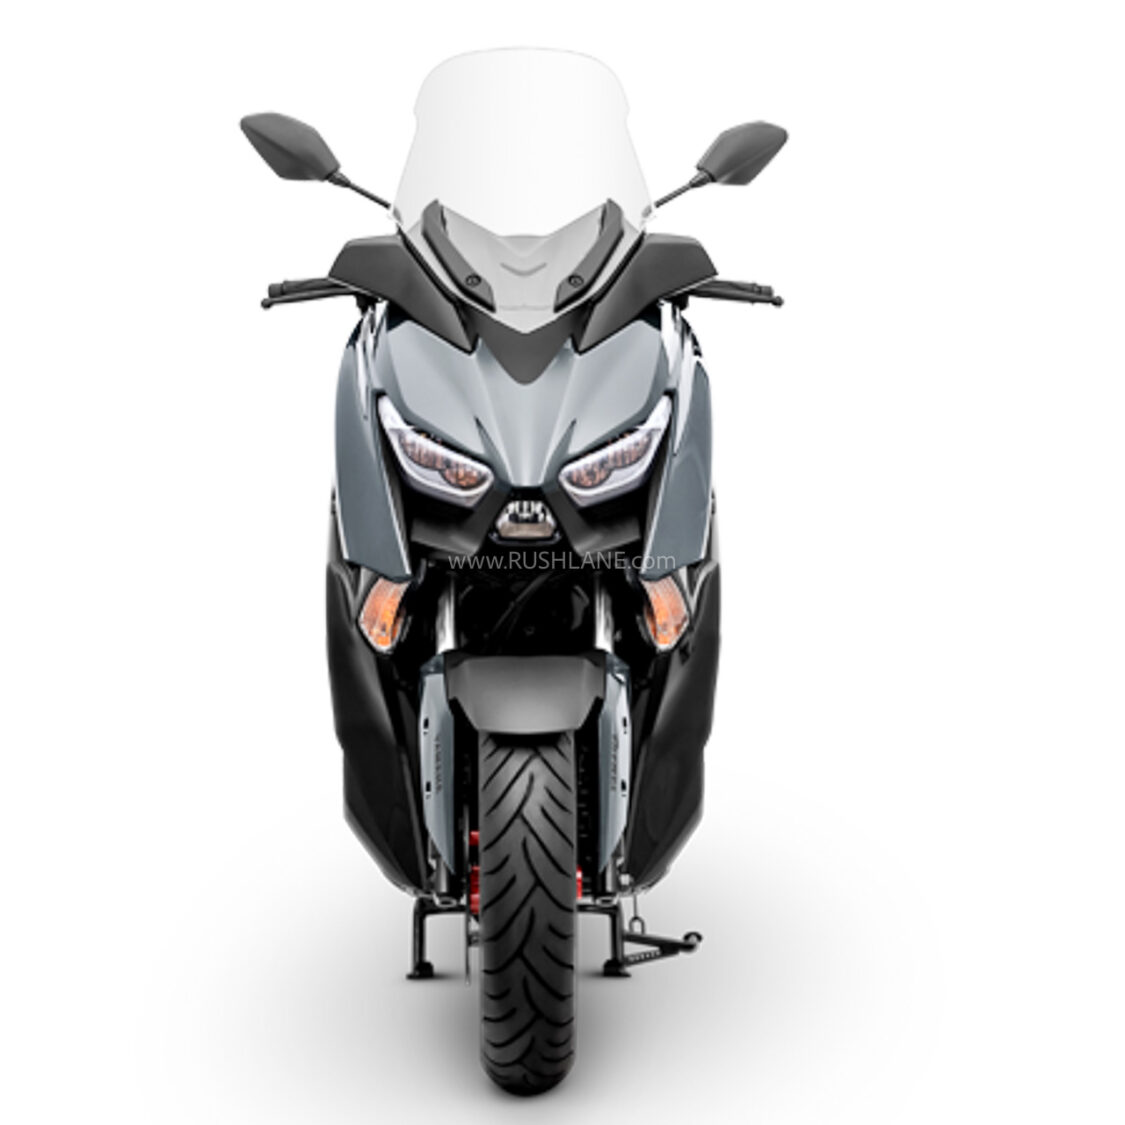 2022 Yamaha XMax SP 300cc Scooter - Sporty